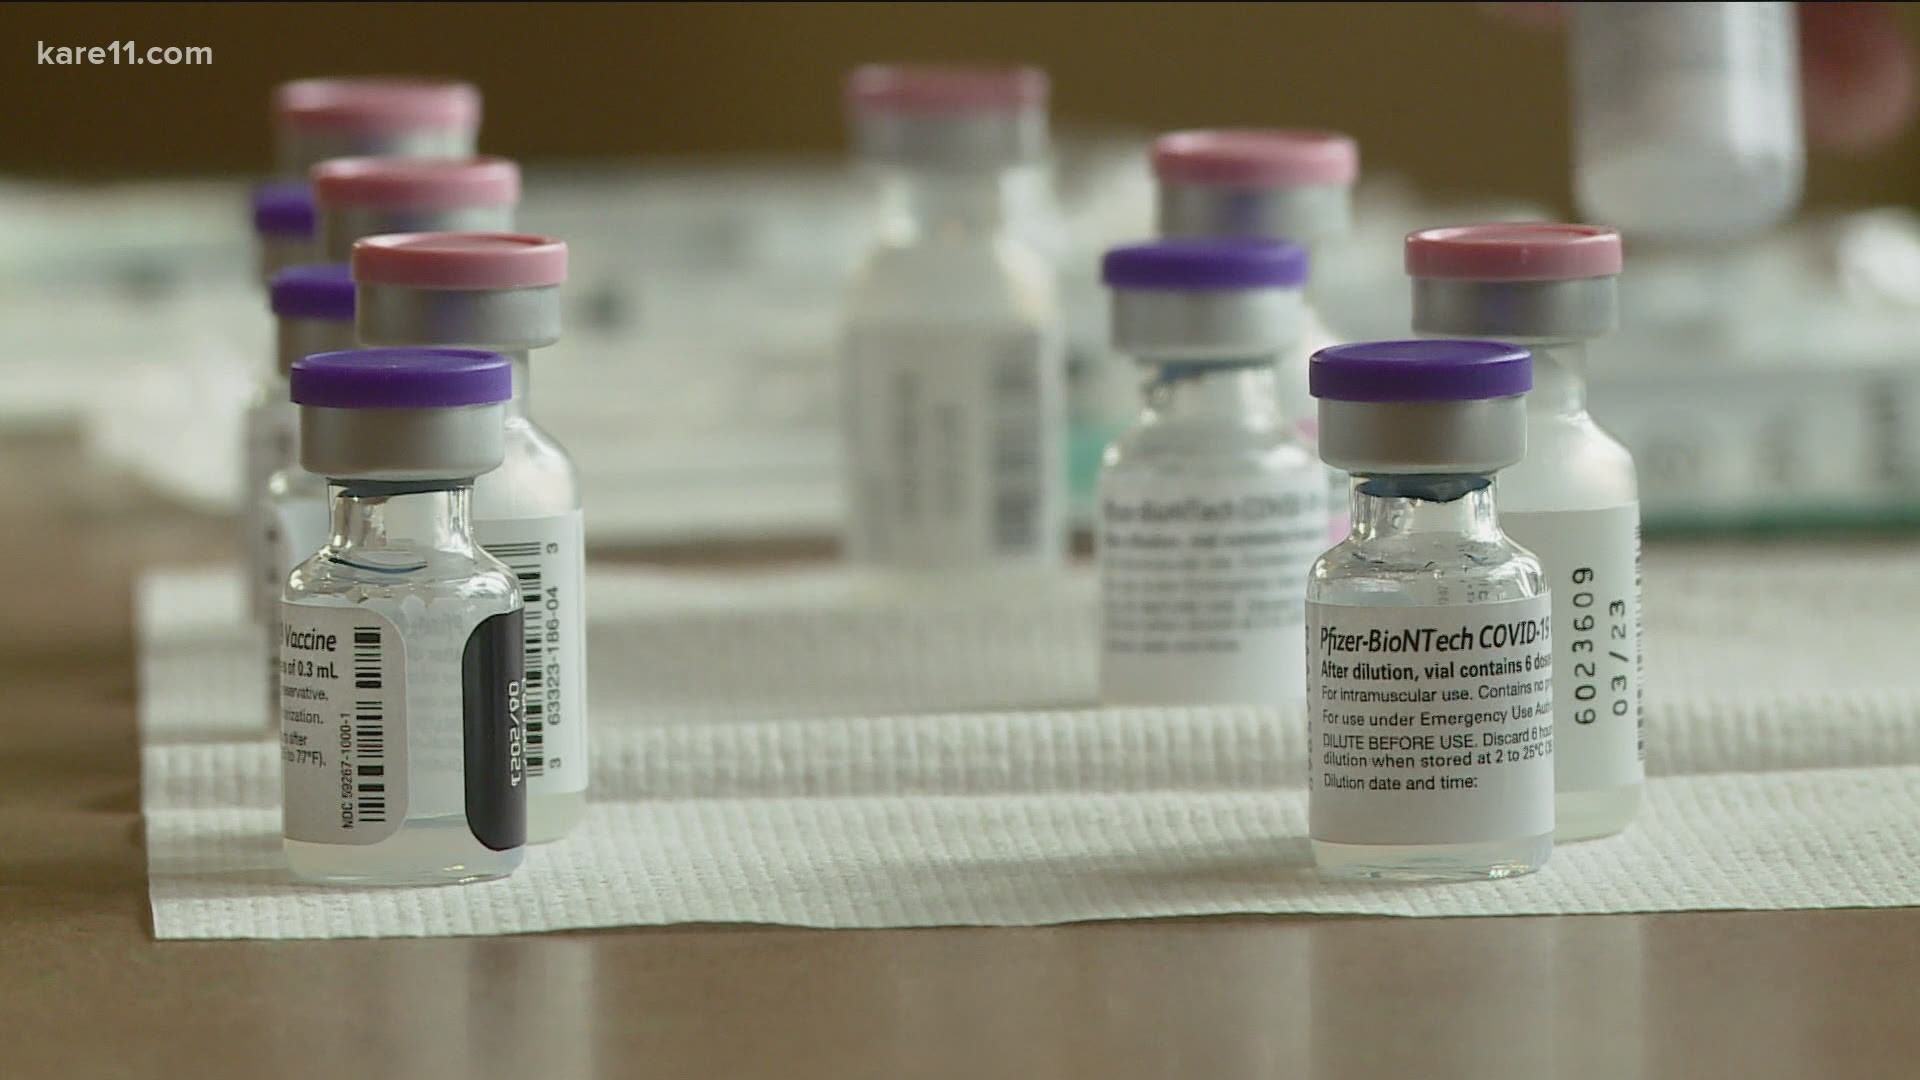 MN Dept. of Health says just 35% of the population in Benton County has received at least one dose.